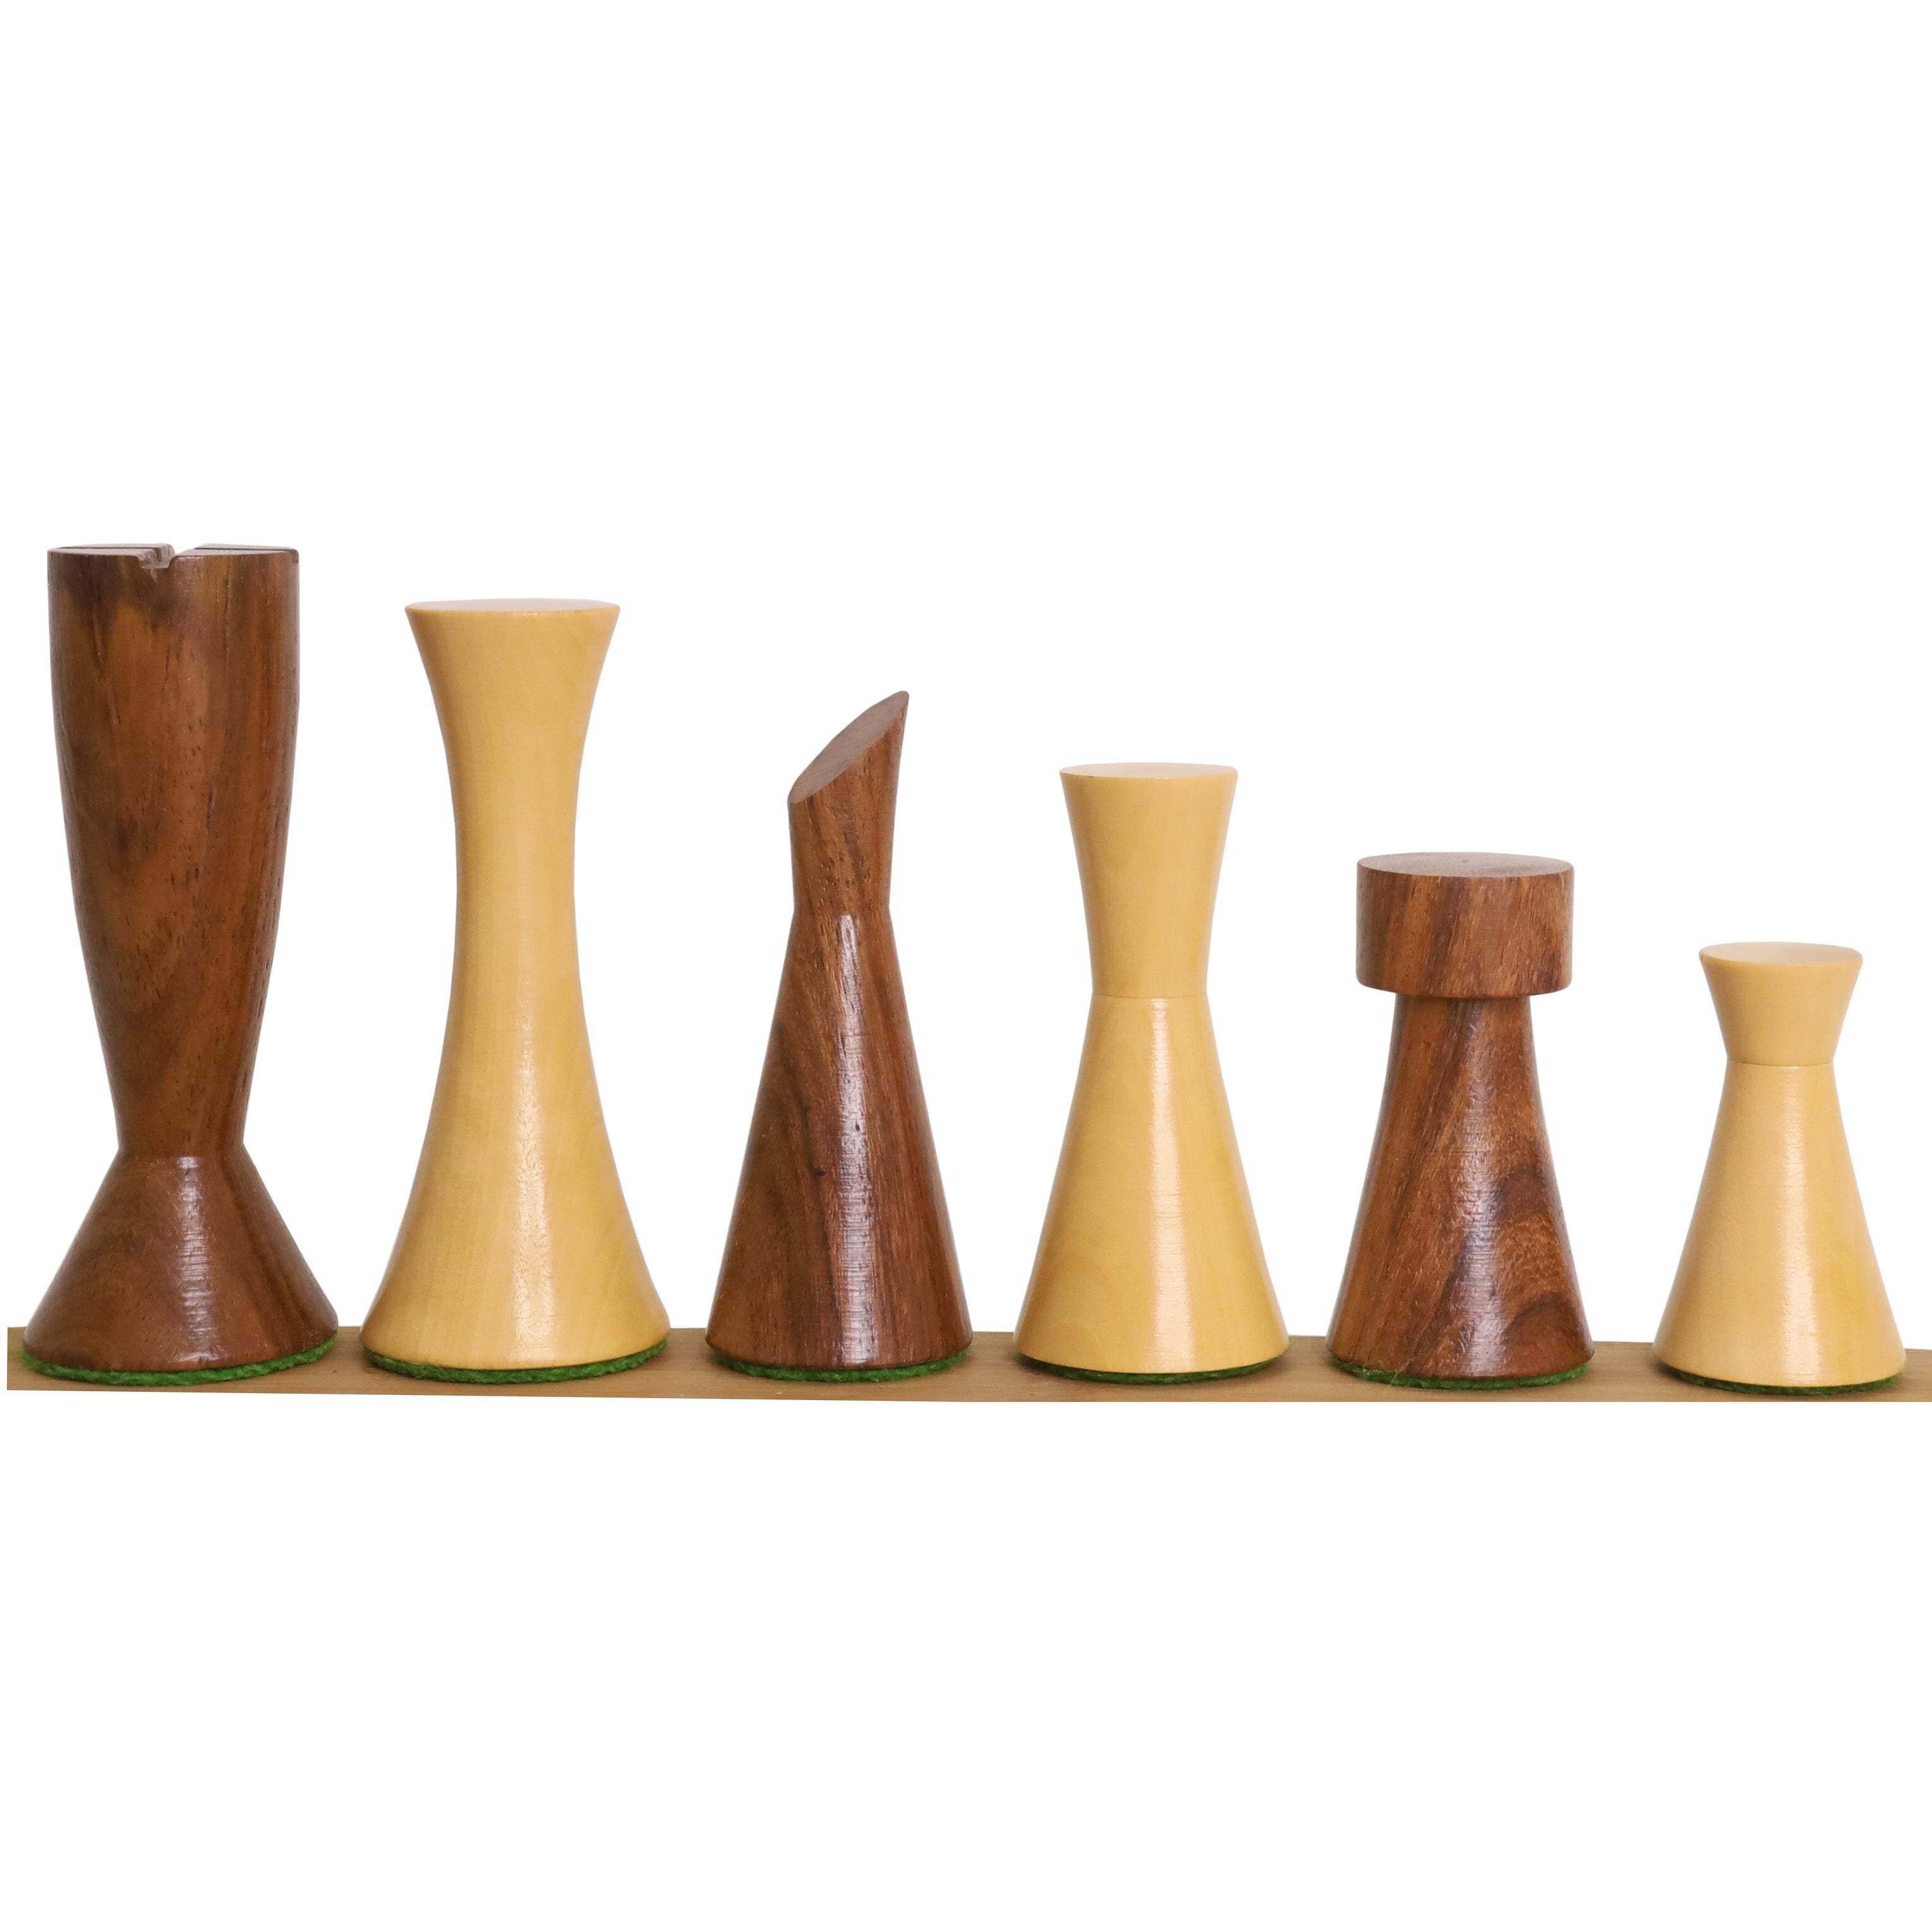 3.4" Minimalist Tower Series Weighted Chess Set Combo - Pieces in Golden Rosewood with Borderless Chess Board